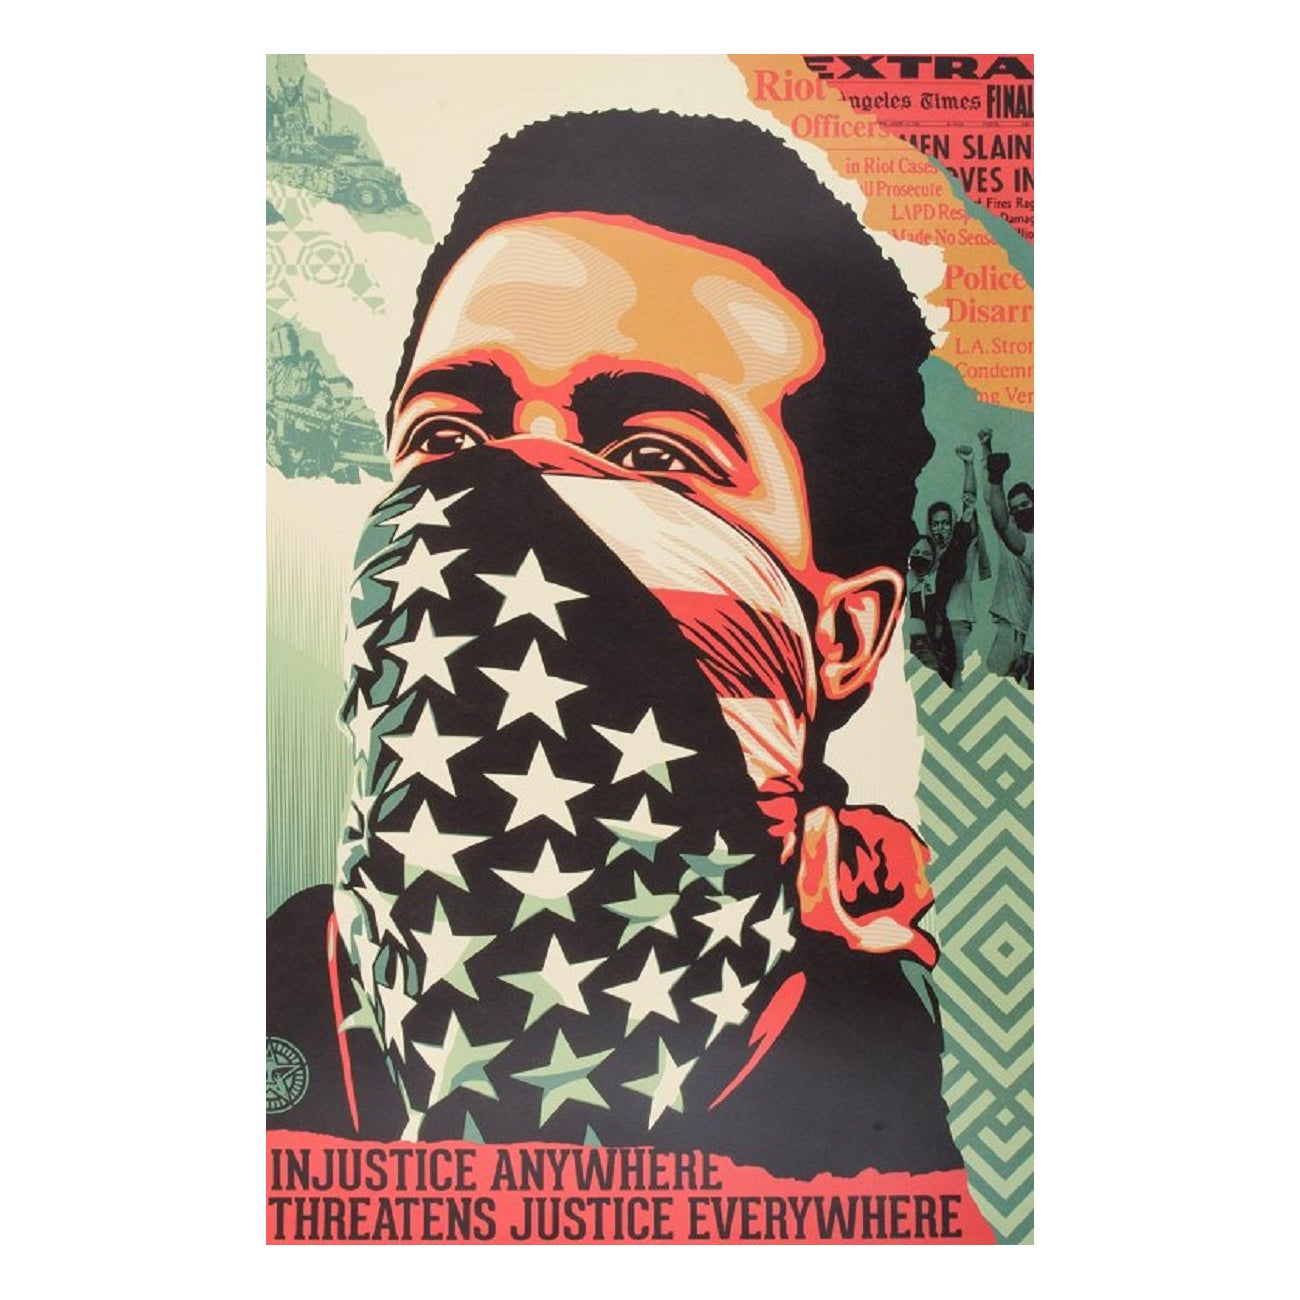 Obey, Shepard Fairey '1970', "Injustice Anywhere Threatens Justice Everywhere" For Sale